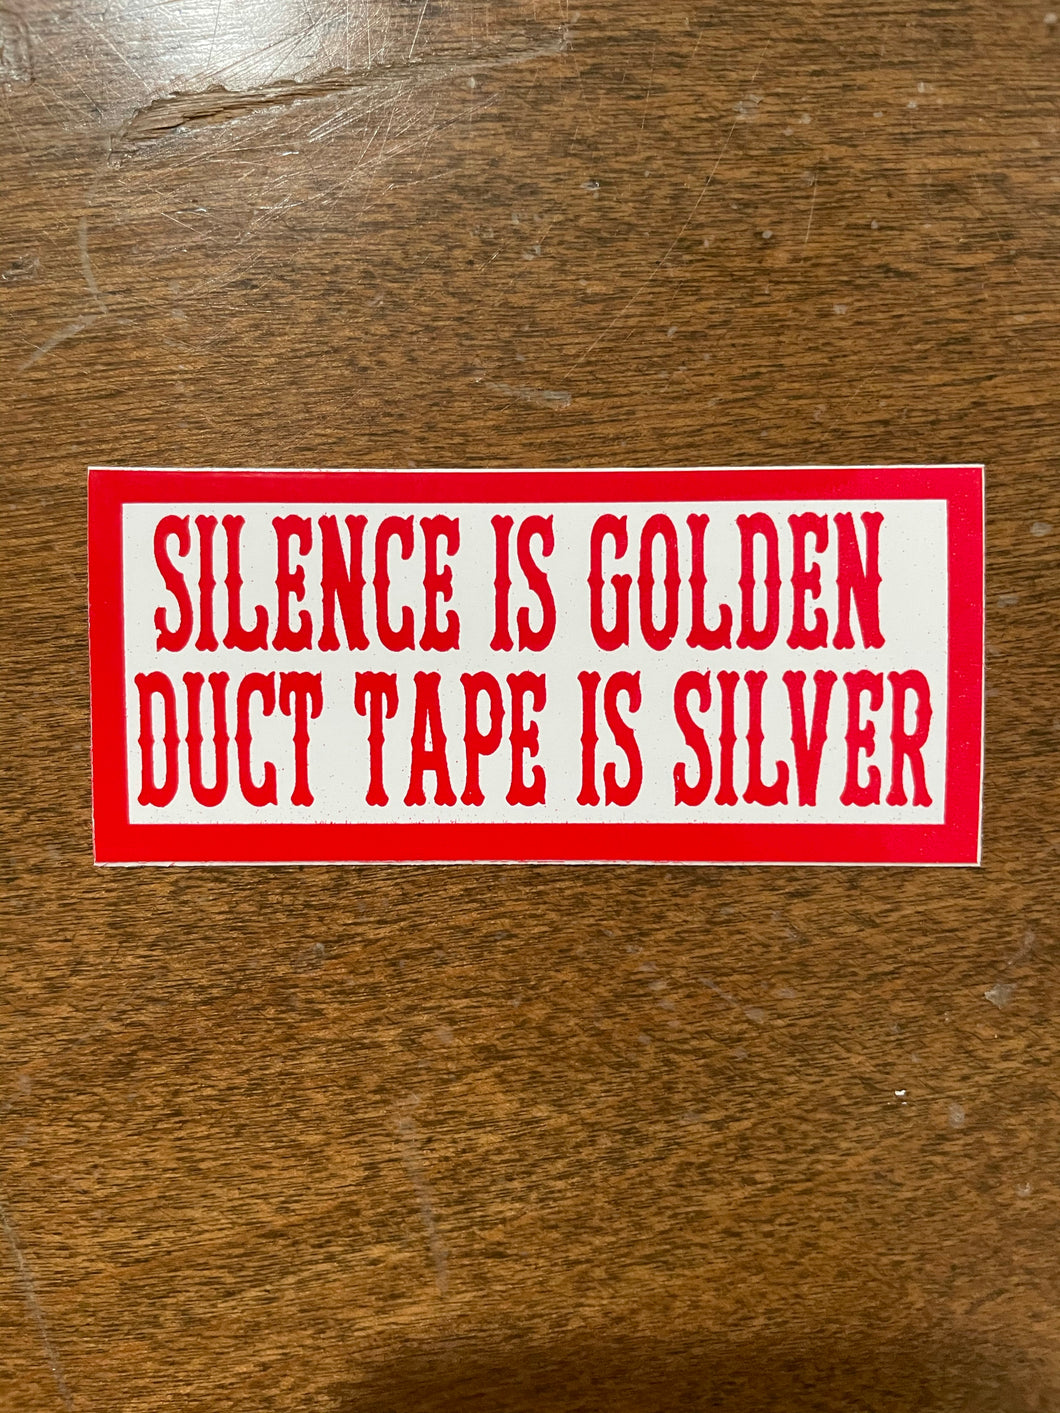 SILENCE IS GOLDEN DUCT TAPE IS SILVER